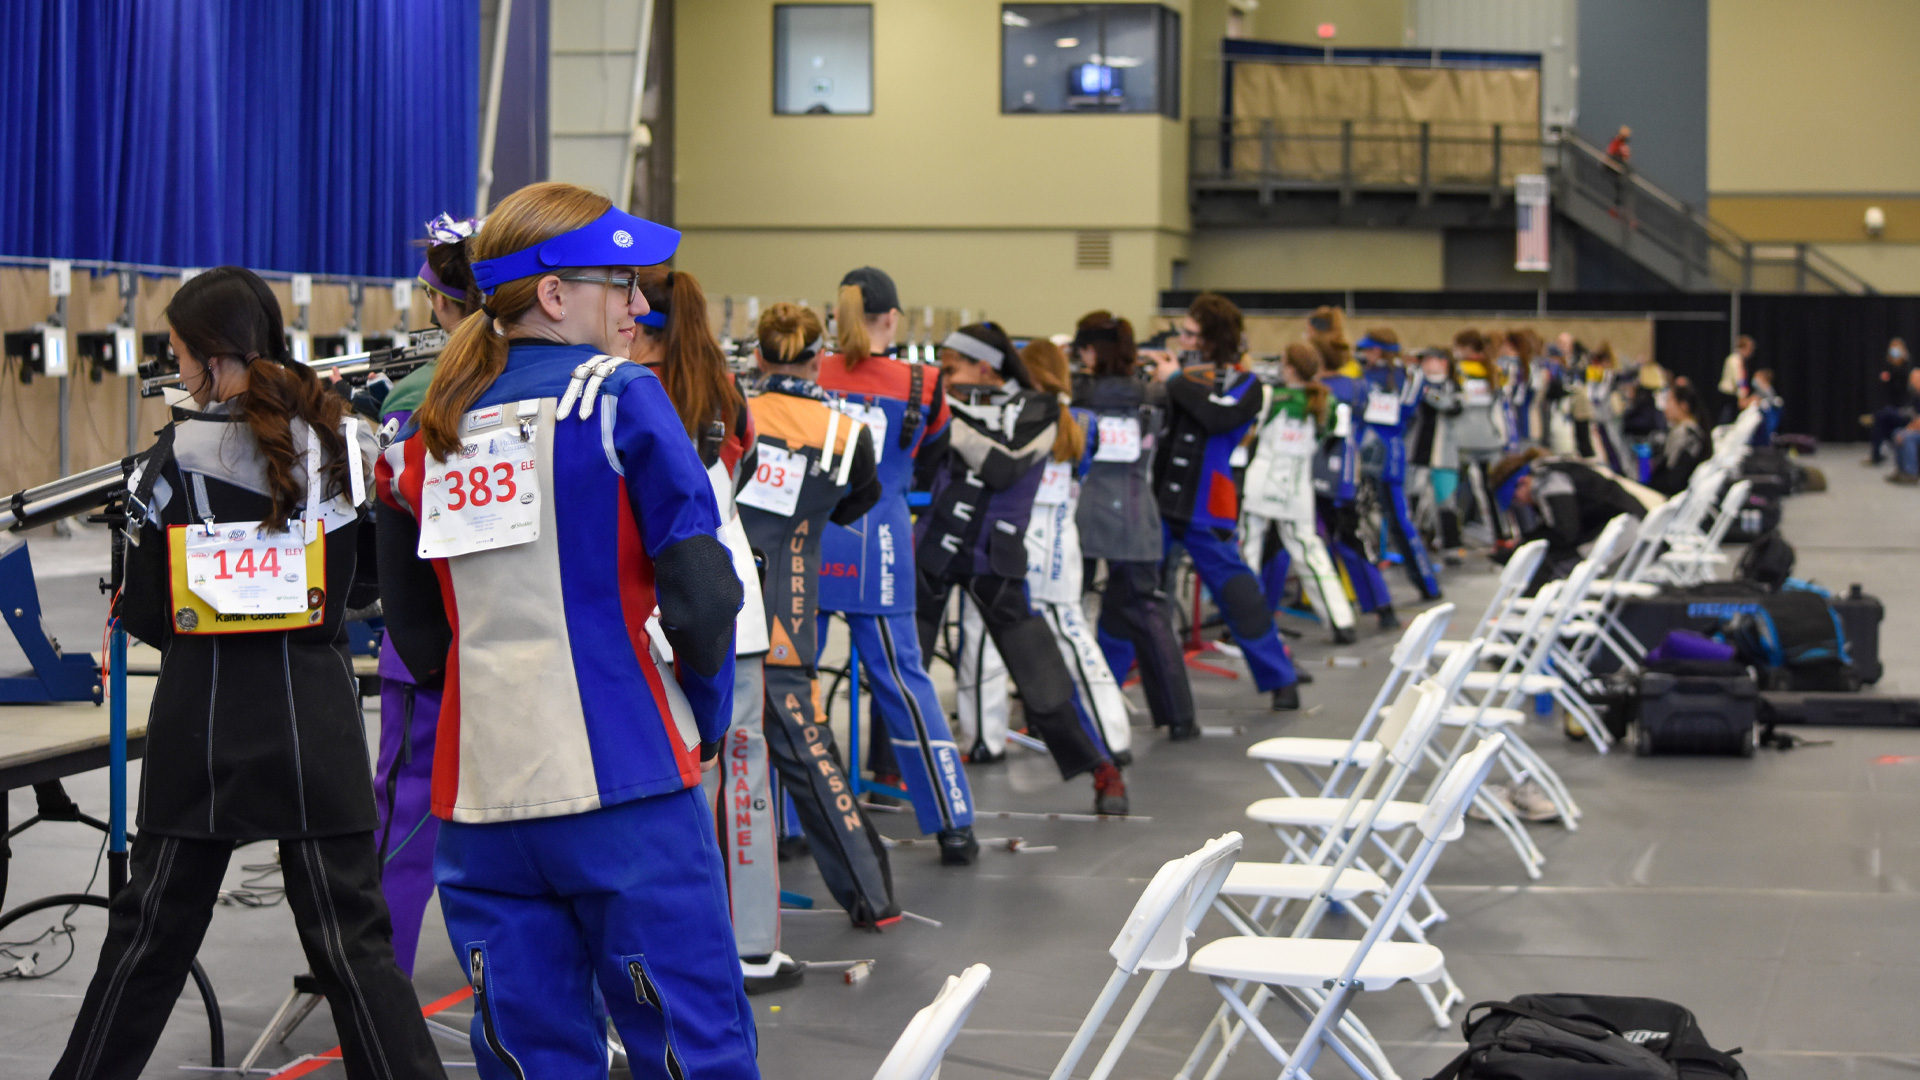 USA Shooting competitors at Hillsdale College